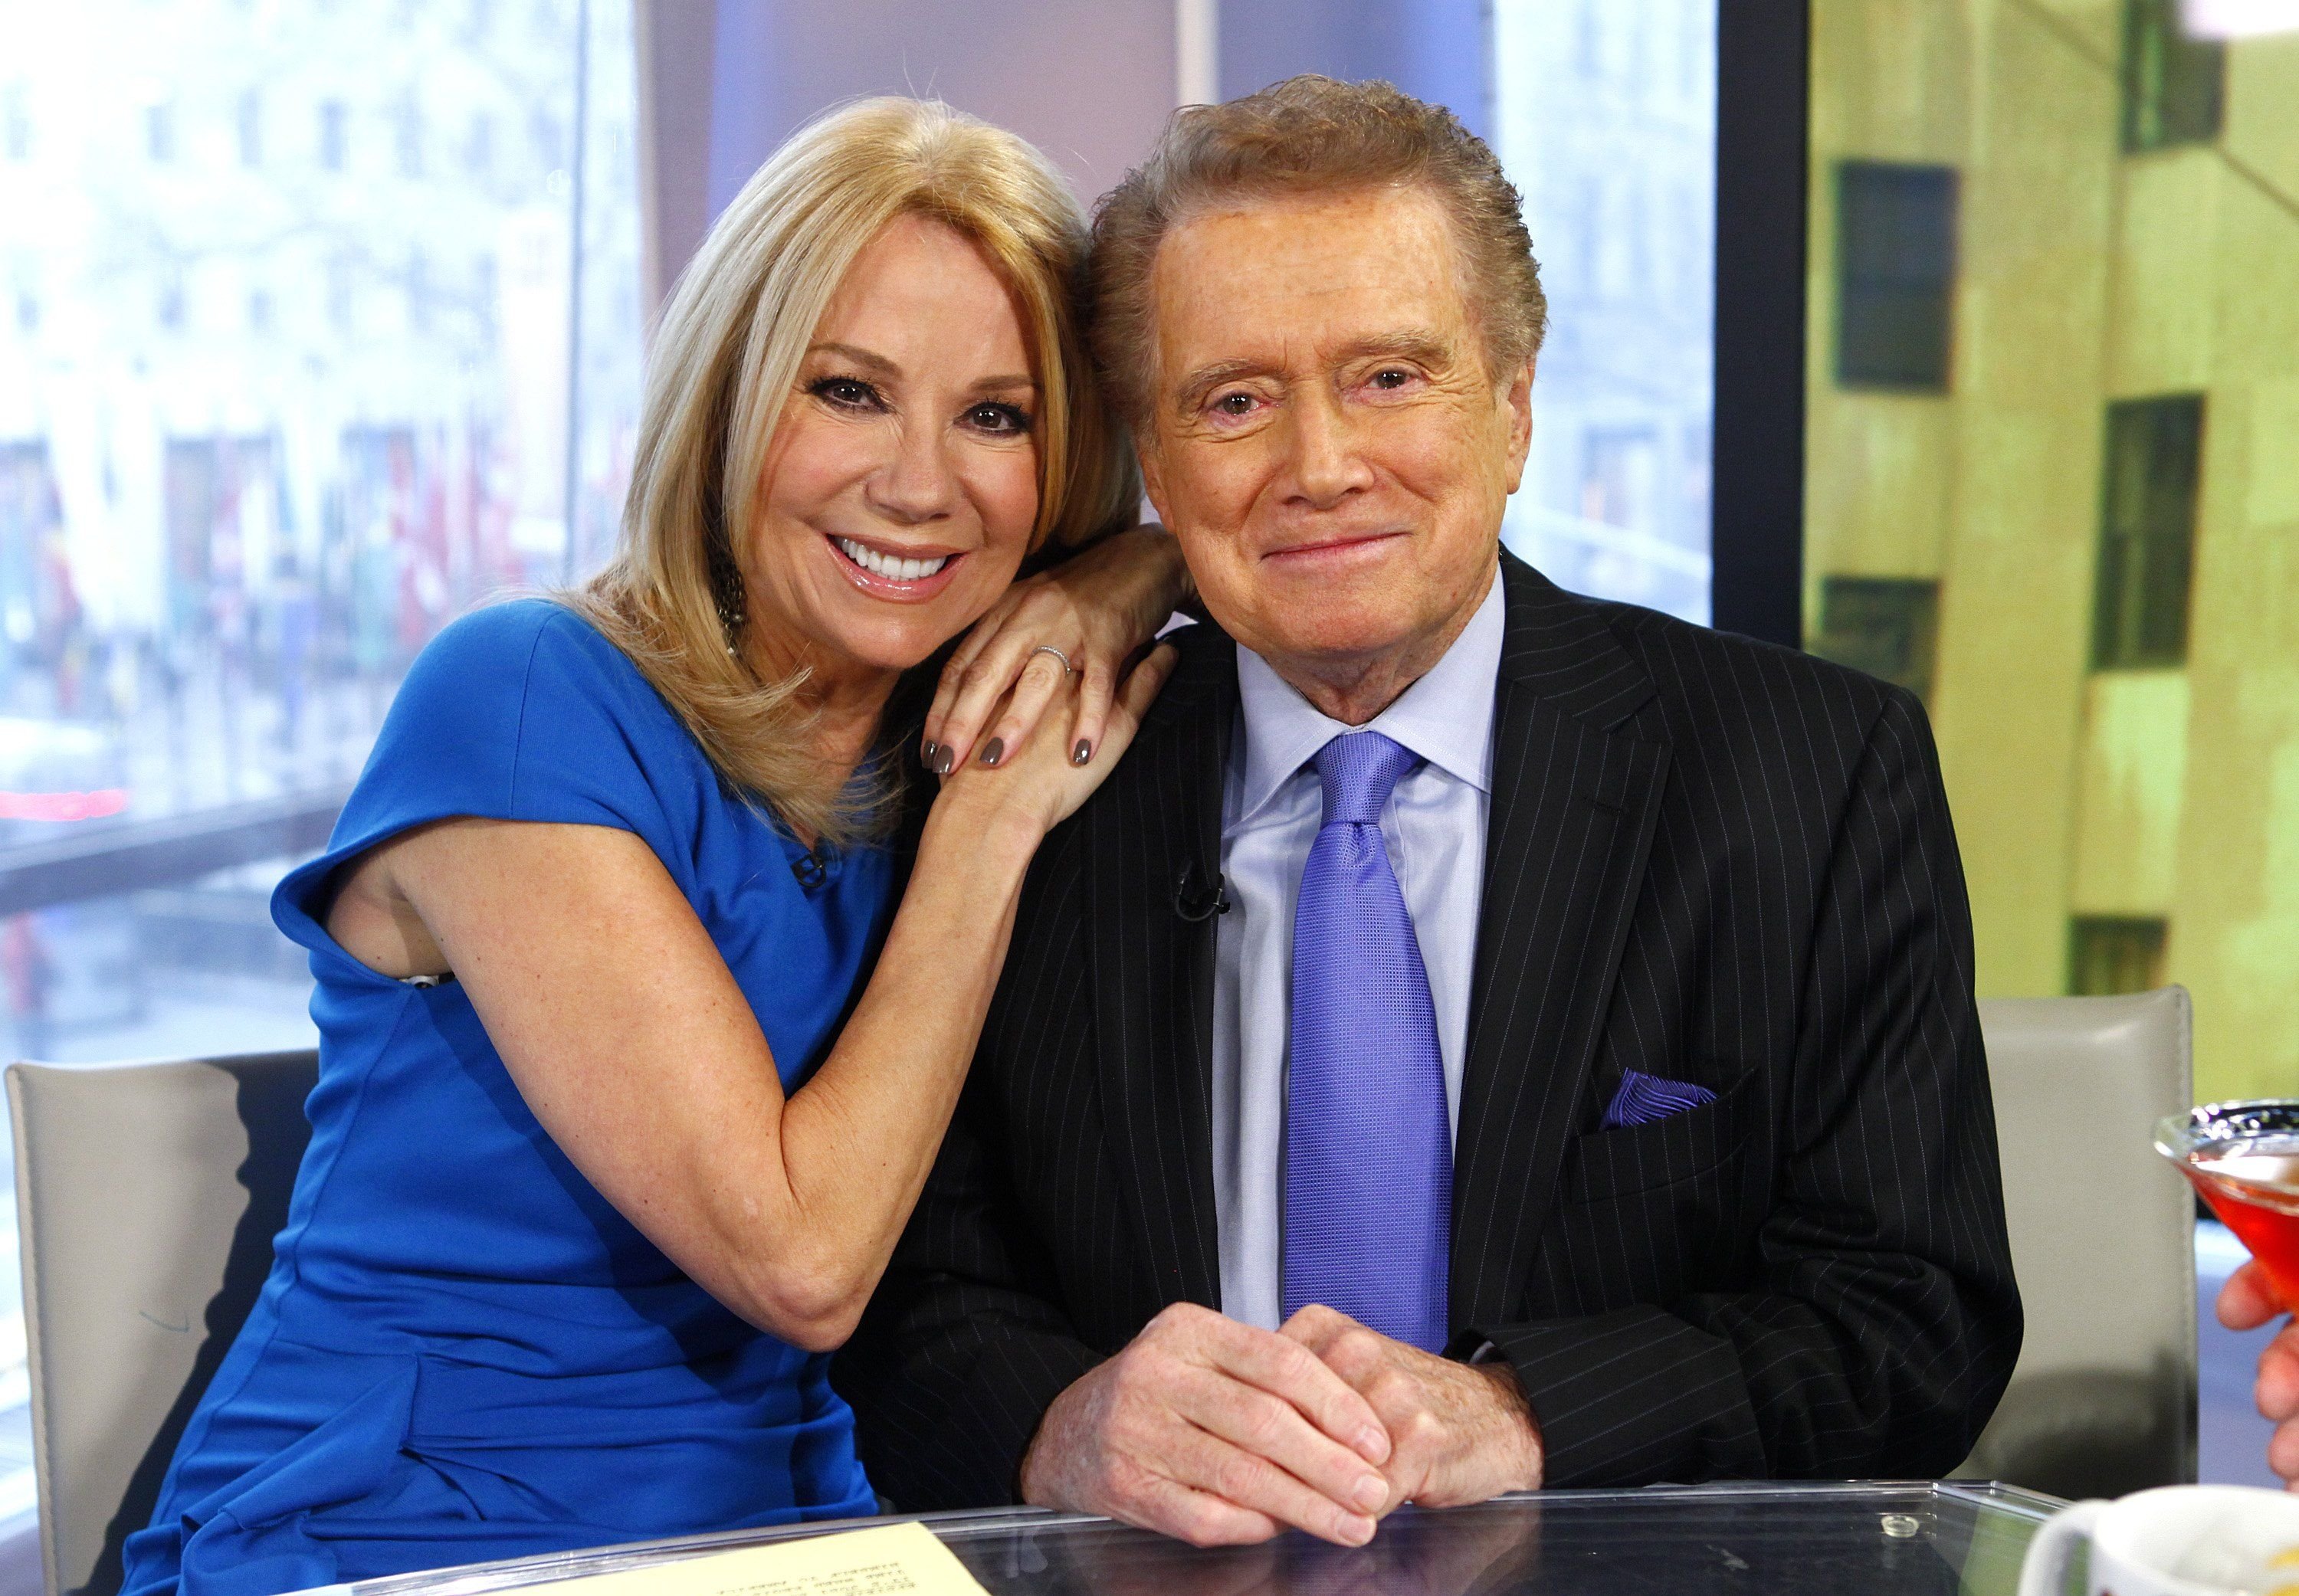 Kathie Lee Gifford and Regis Philbin on NBC News' "Today" show on January 19, 2012 | Photo: Getty Images